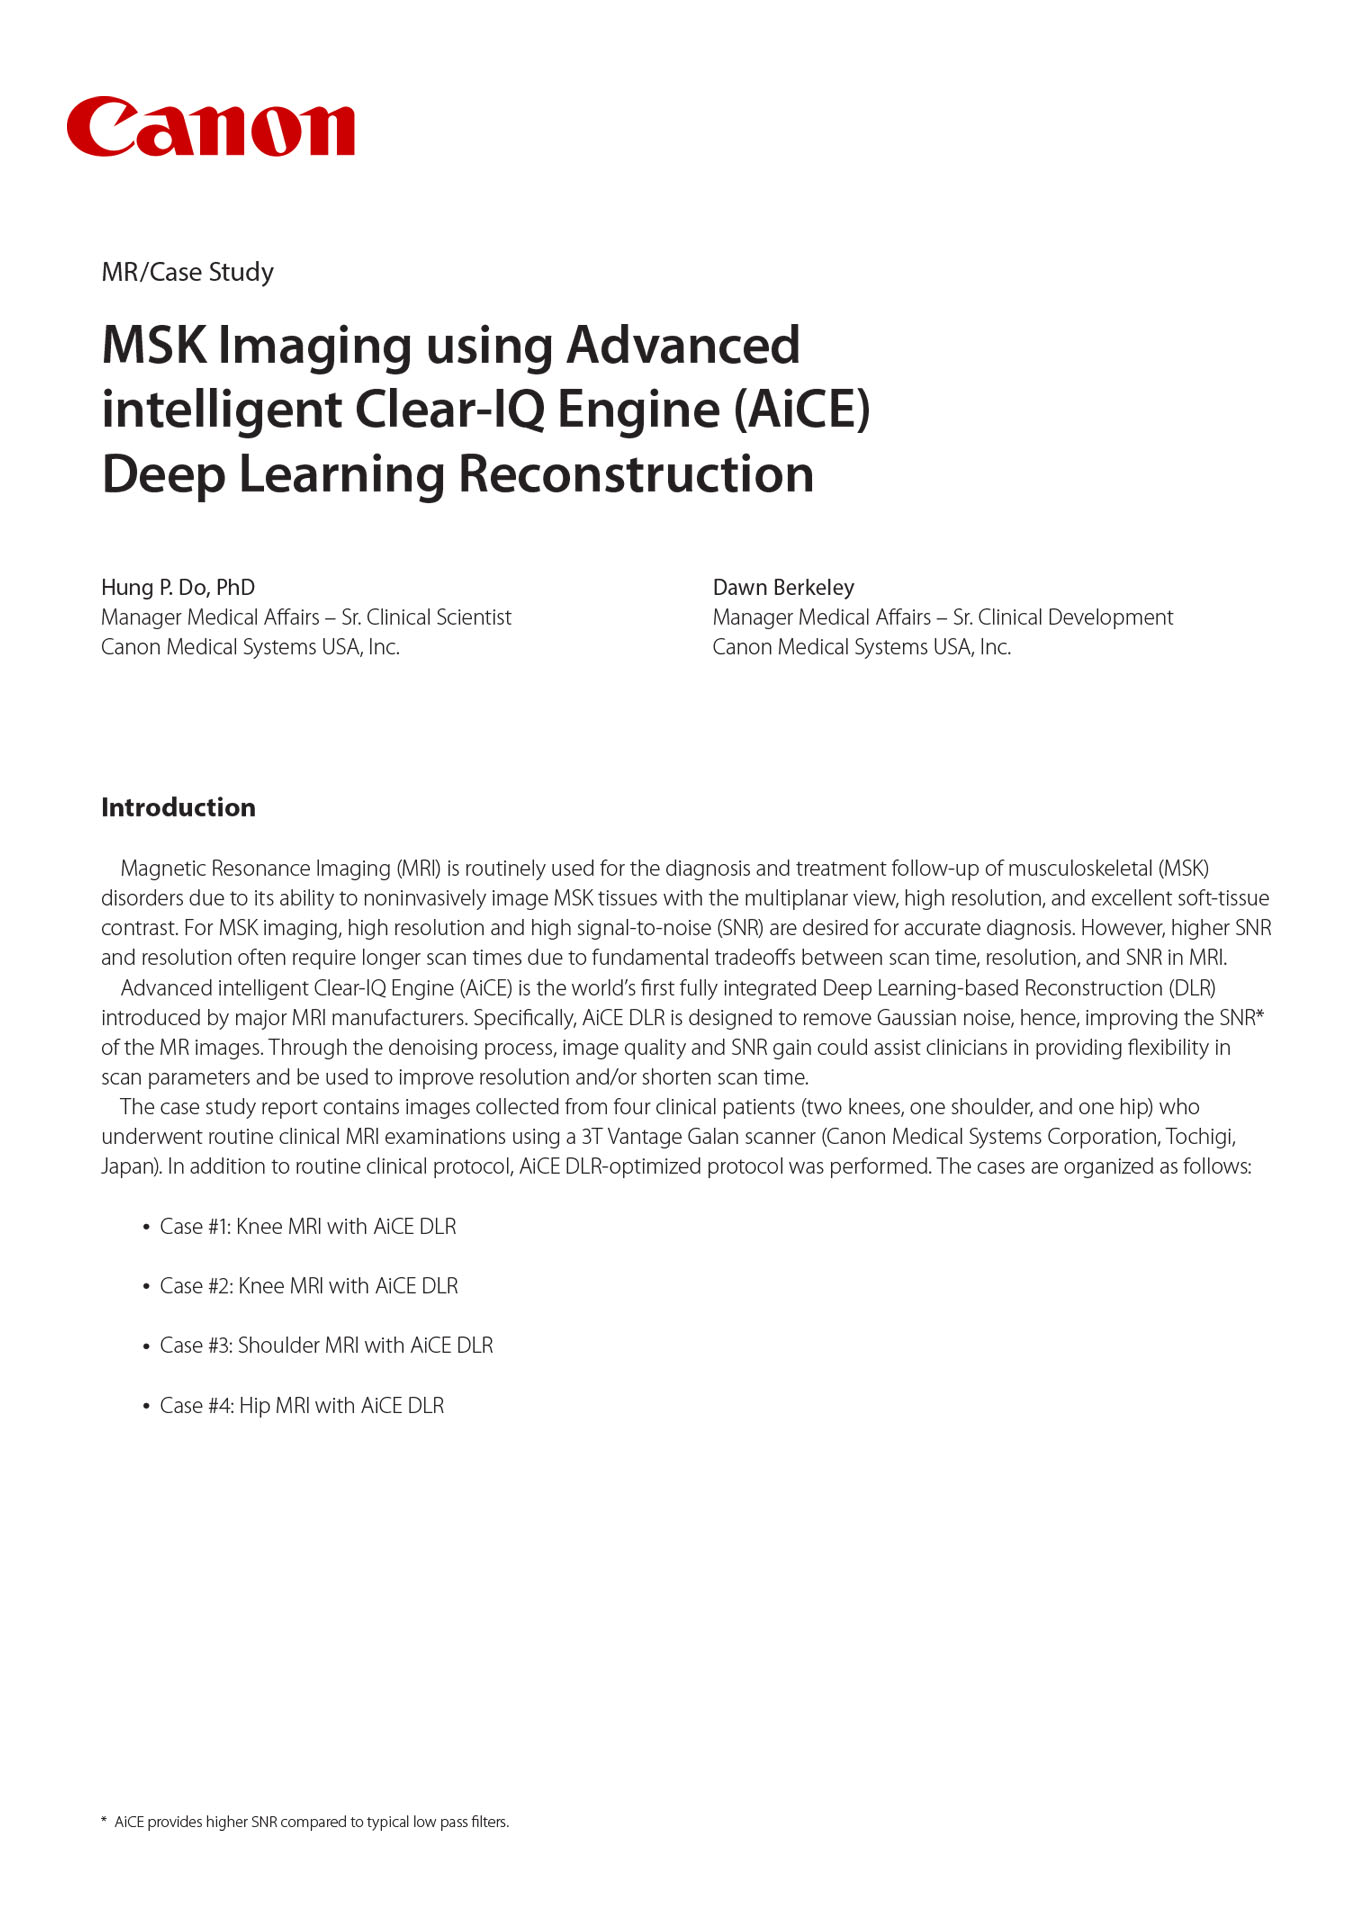 MSK Imaging using Advanced intelligent Clear-IQ Engine (AiCE) Deep Learning Reconstruction